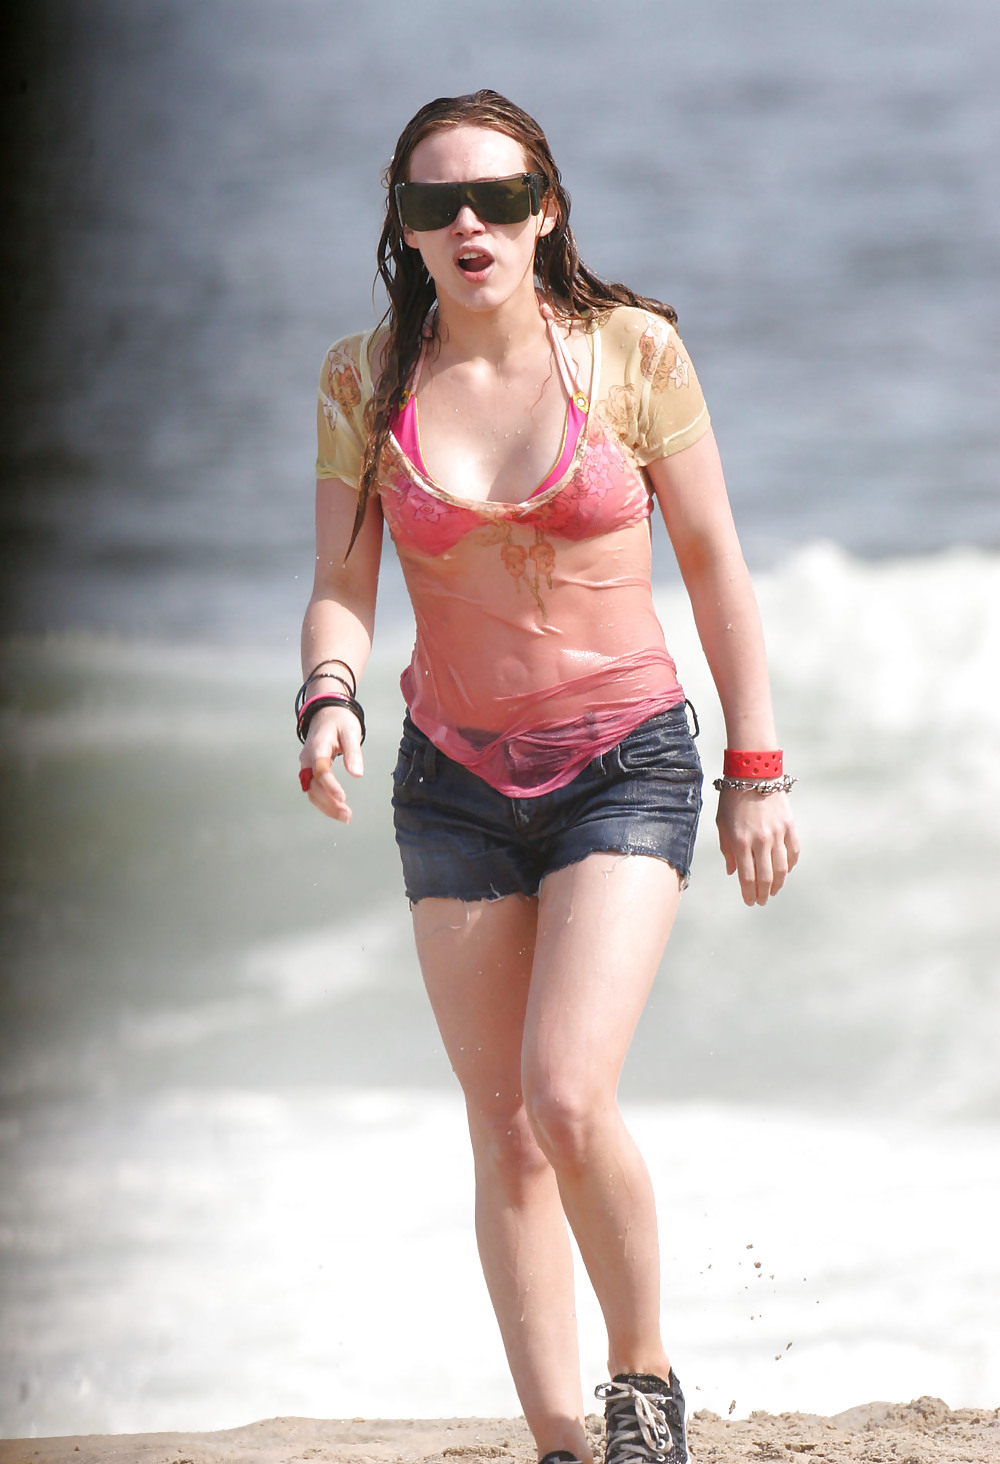 Hilary Duff at the Beach playing around in a wet shirt #7220896